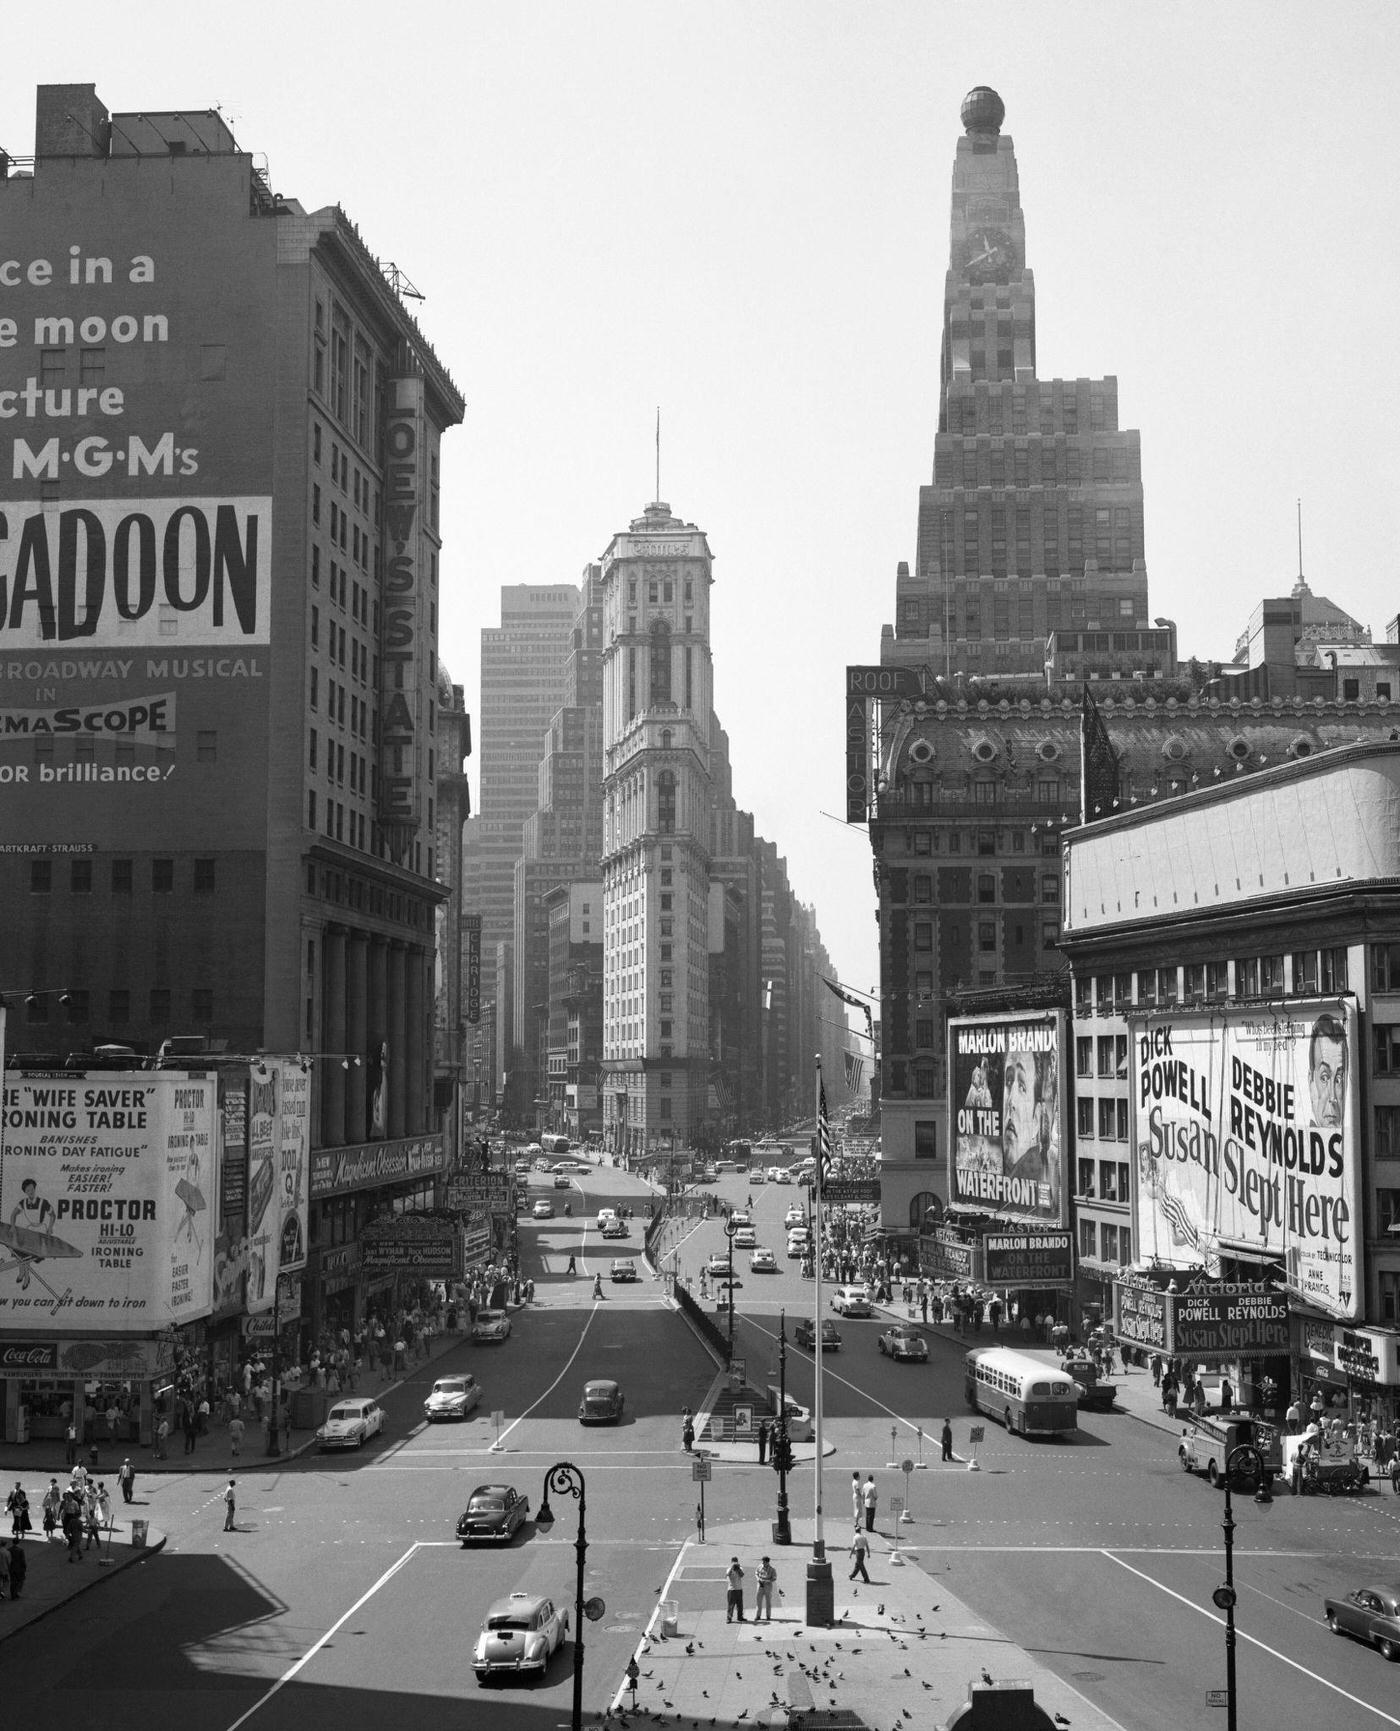 Times Square New York City Looking South From Duffy Square, Manhattan, 1950S